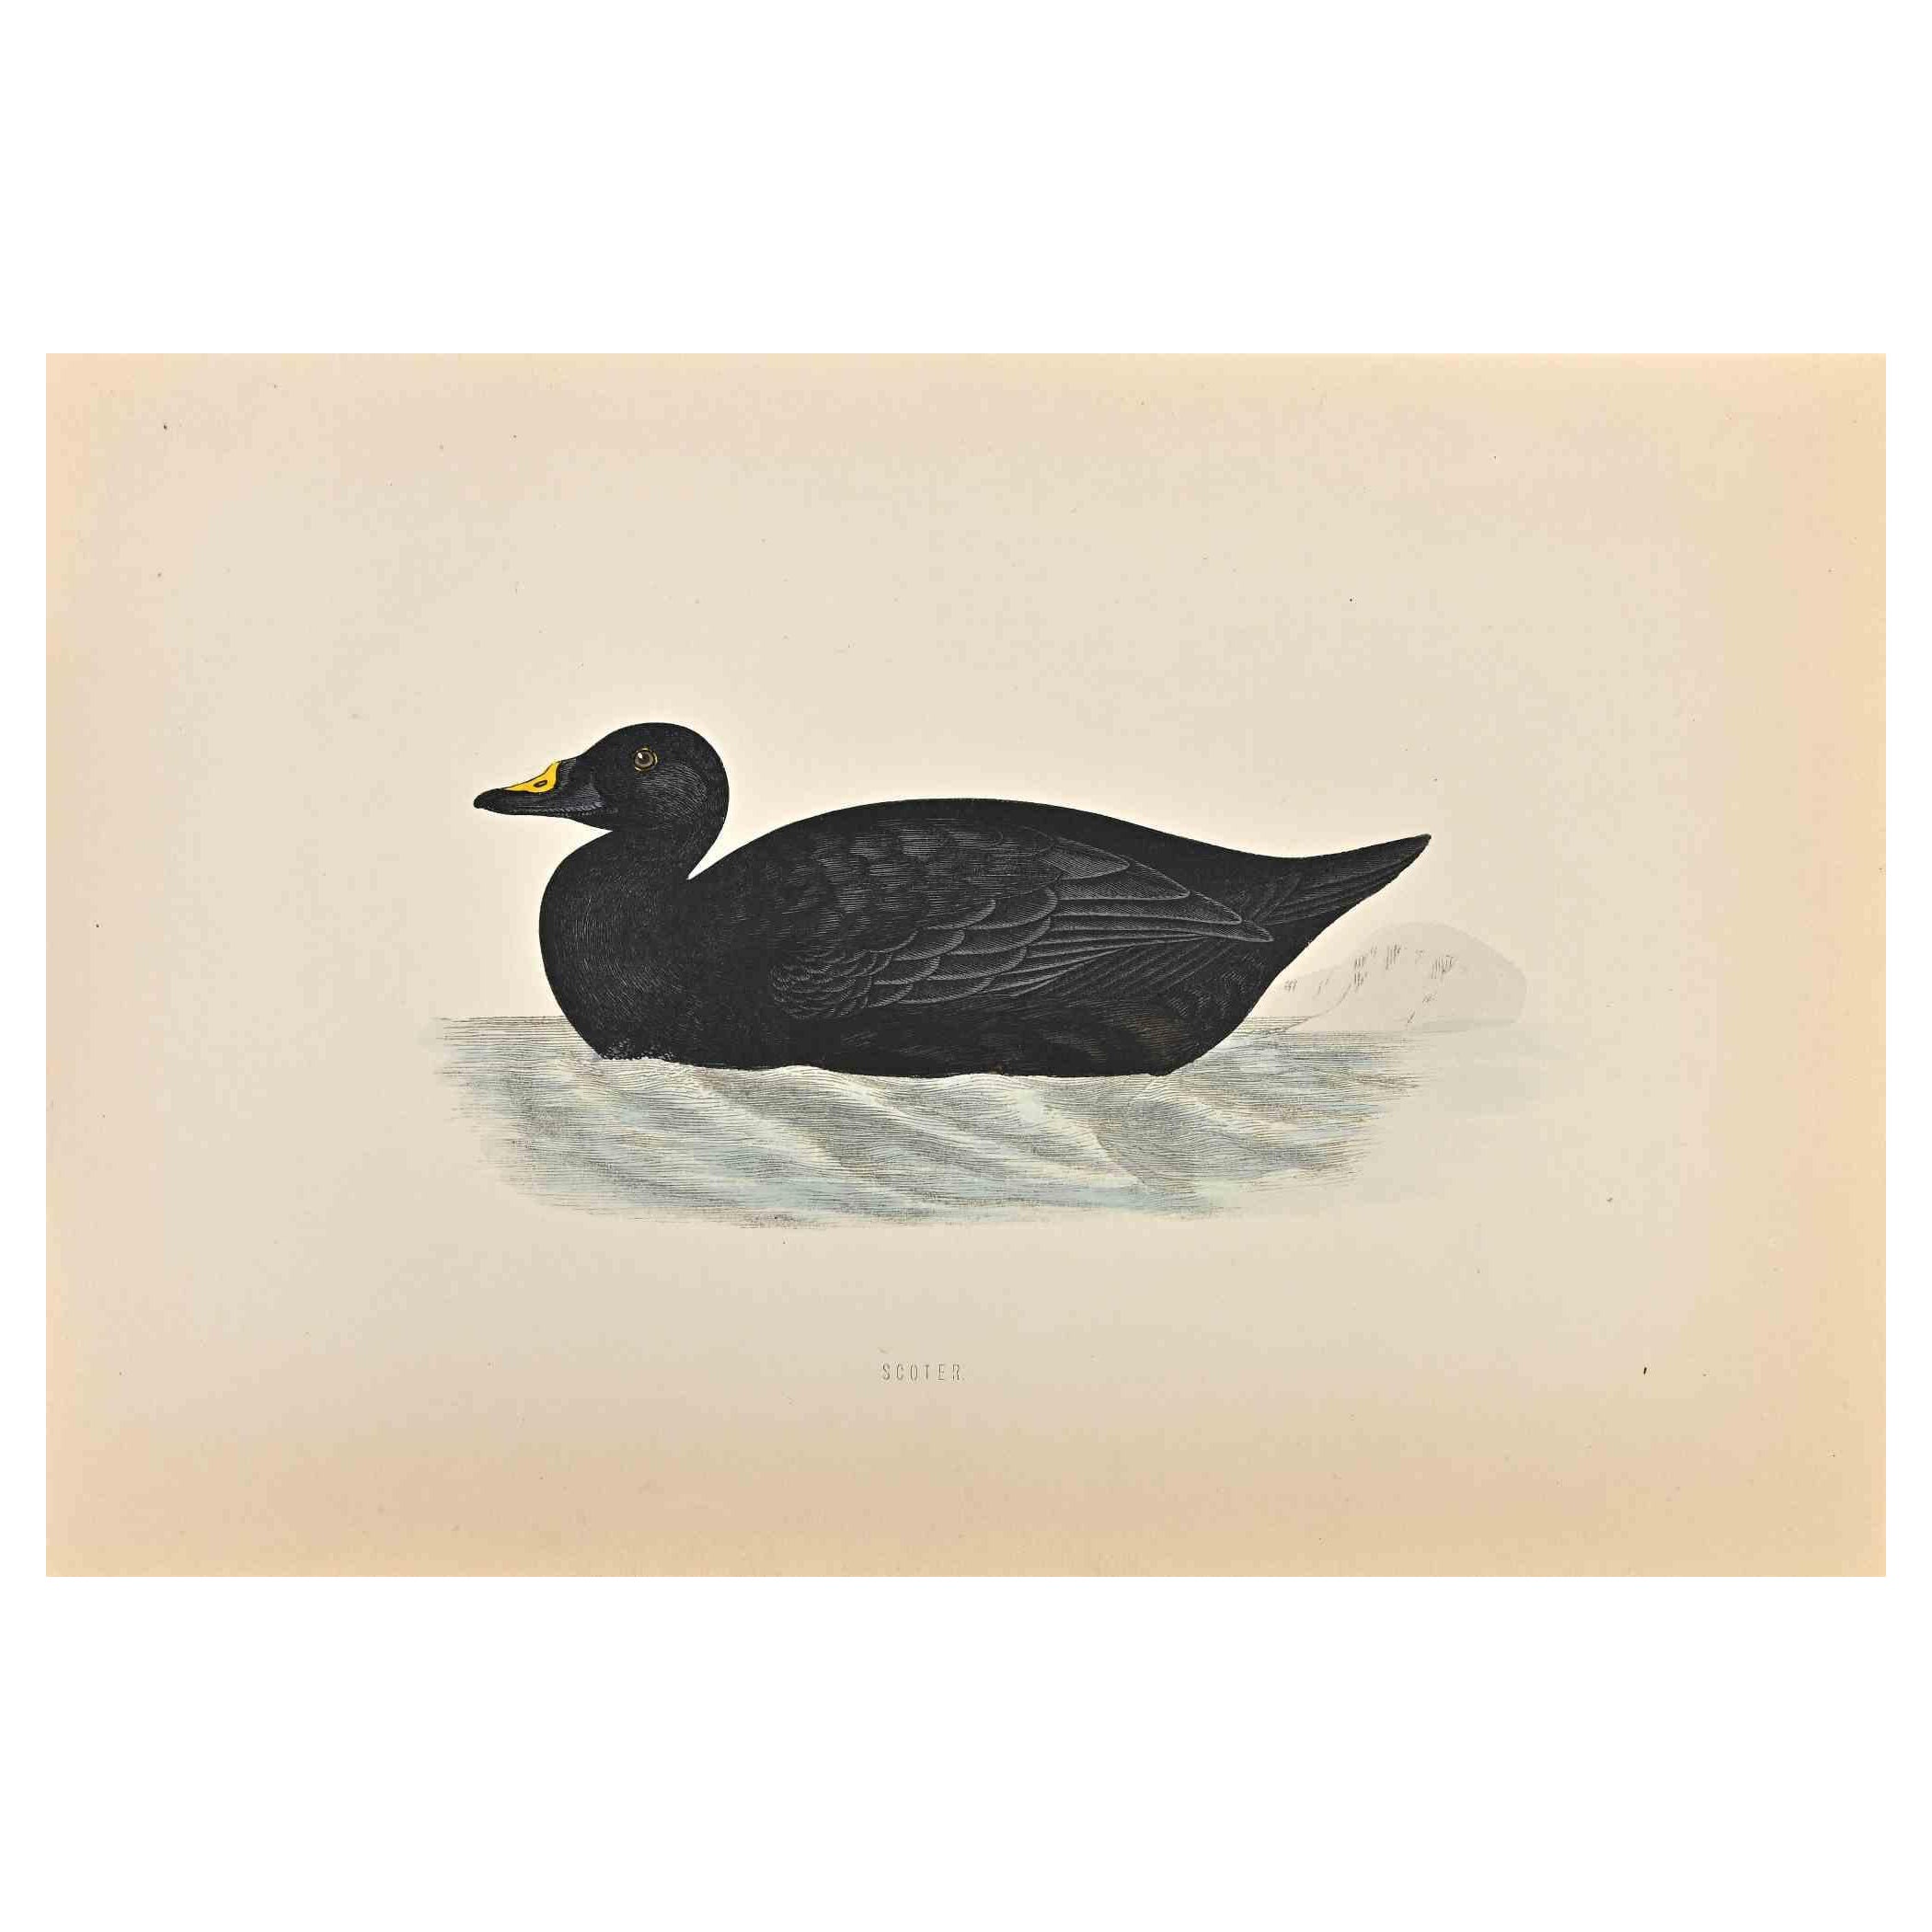 Scoter is a modern artwork realized in 1870 by the British artist Alexander Francis Lydon (1836-1917).

Woodcut print on ivory-colored paper.

Hand-colored, published by London, Bell & Sons, 1870.  

The name of the bird is printed on the plate.